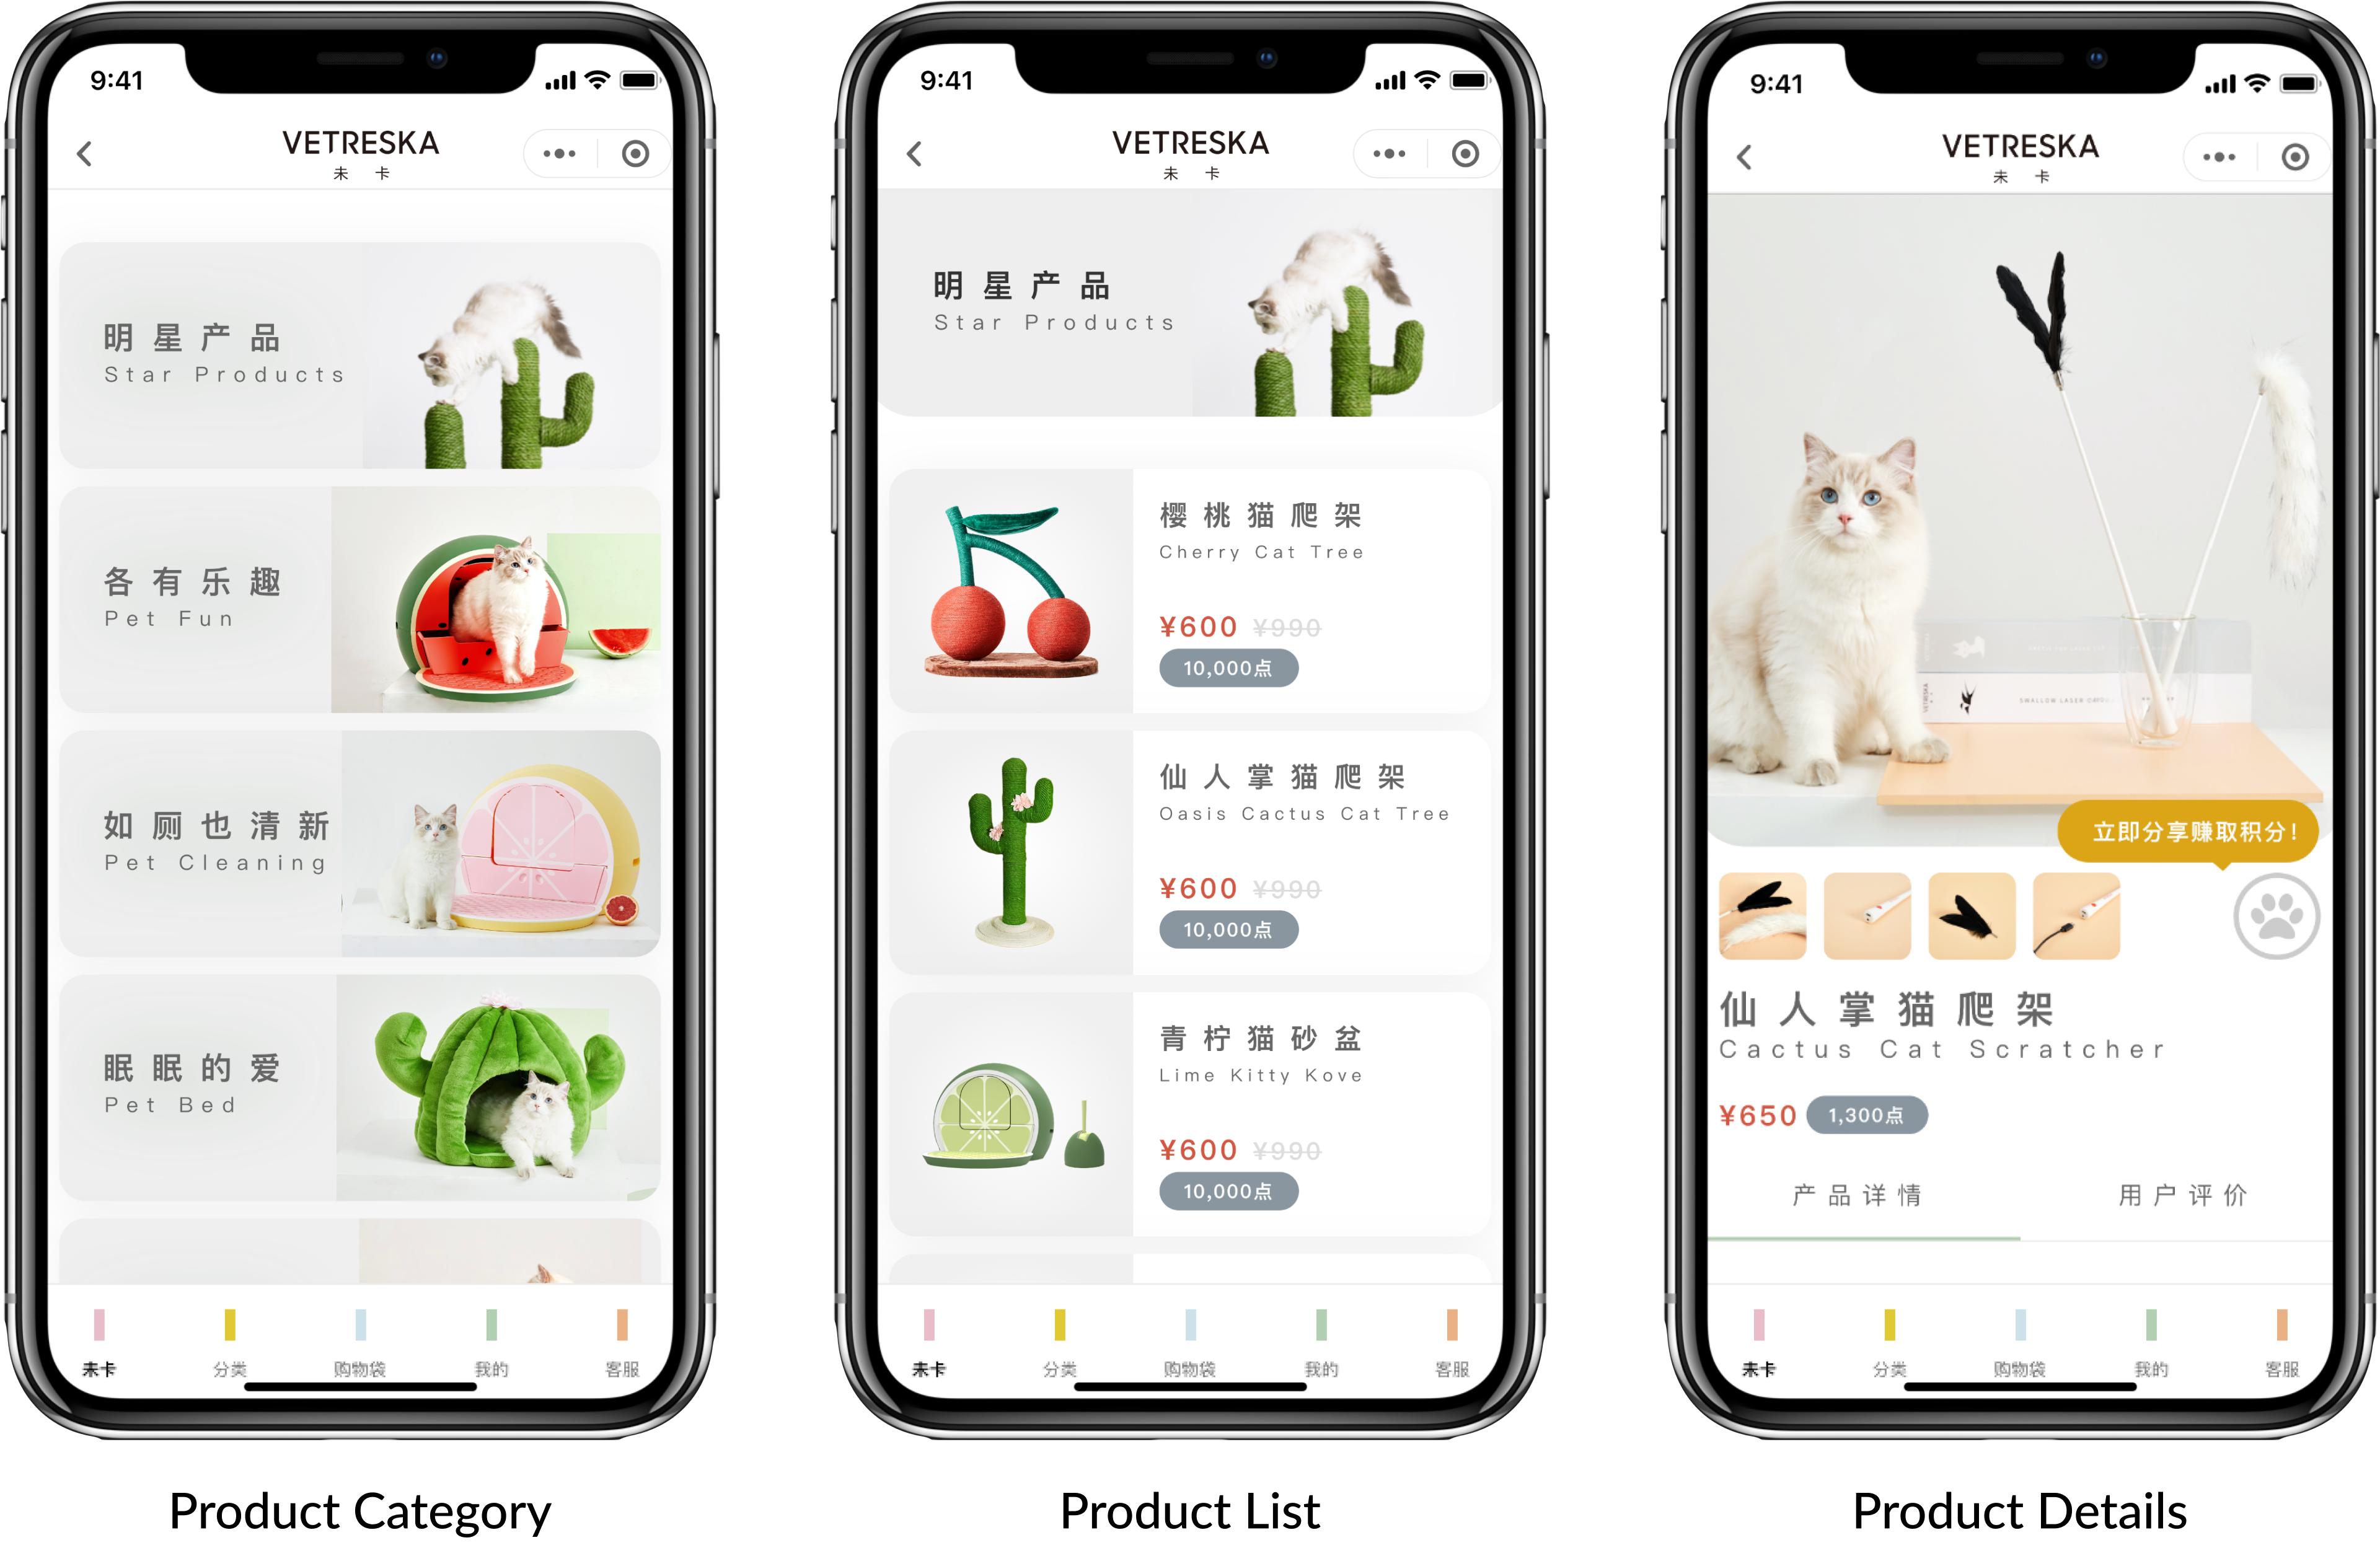 Vetreska Product Category, Product List, and Product Details pages in the eCommerce WeChat Mini Program